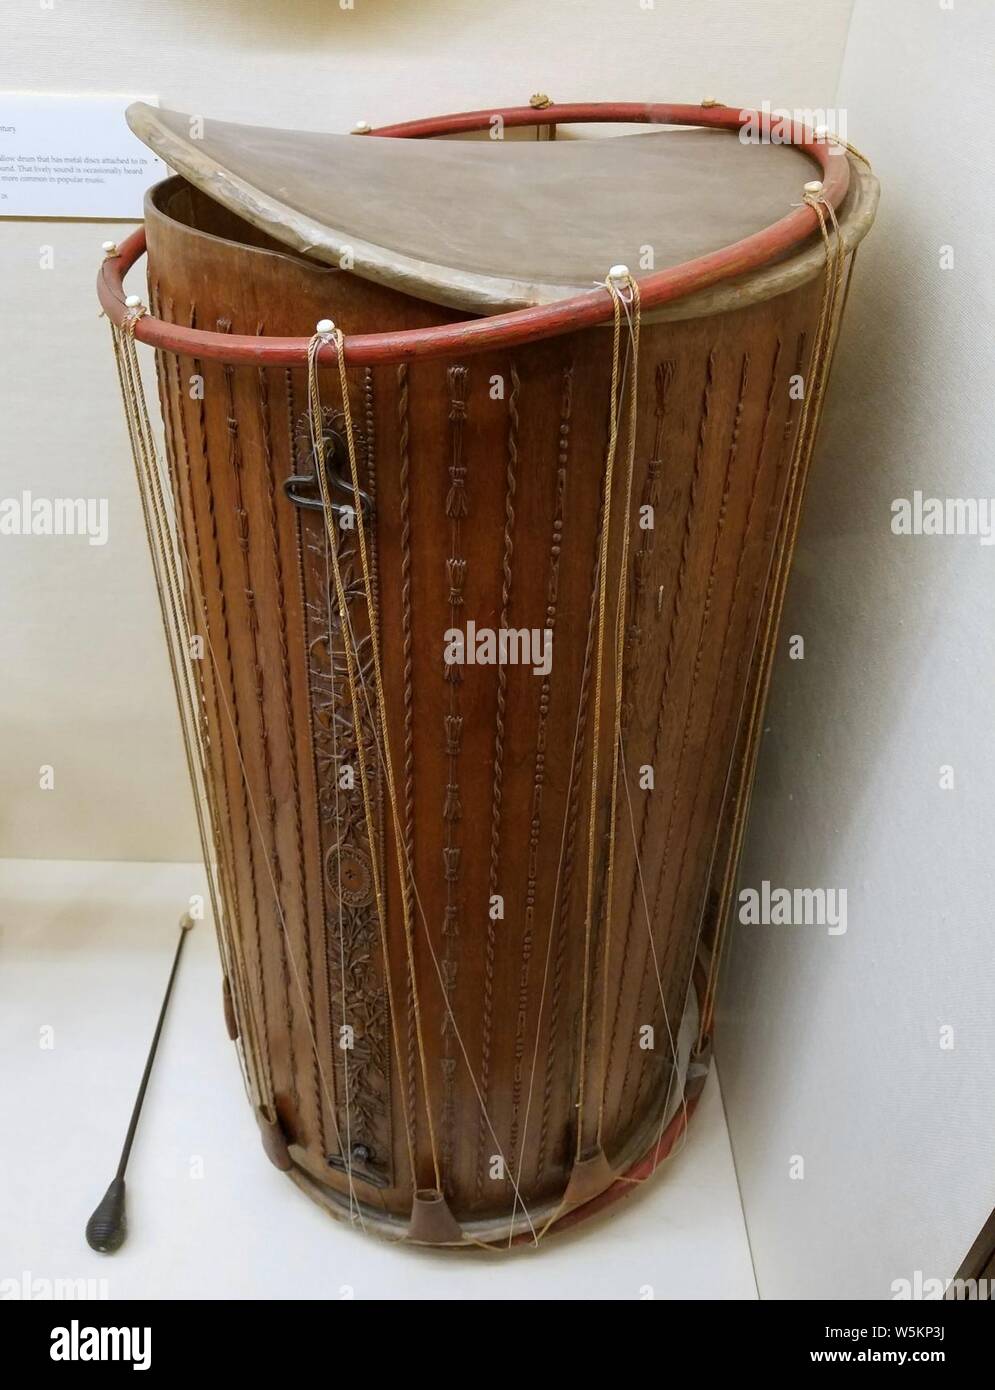 Cylindrical drum (tambourin), Provence region, France, early 1800s, walnut,  maple, calfskin - Casadesus Collection of Historic Musical Instruments -  Boston Symphony Orchestra - 20180113 192027 Stock Photo - Alamy